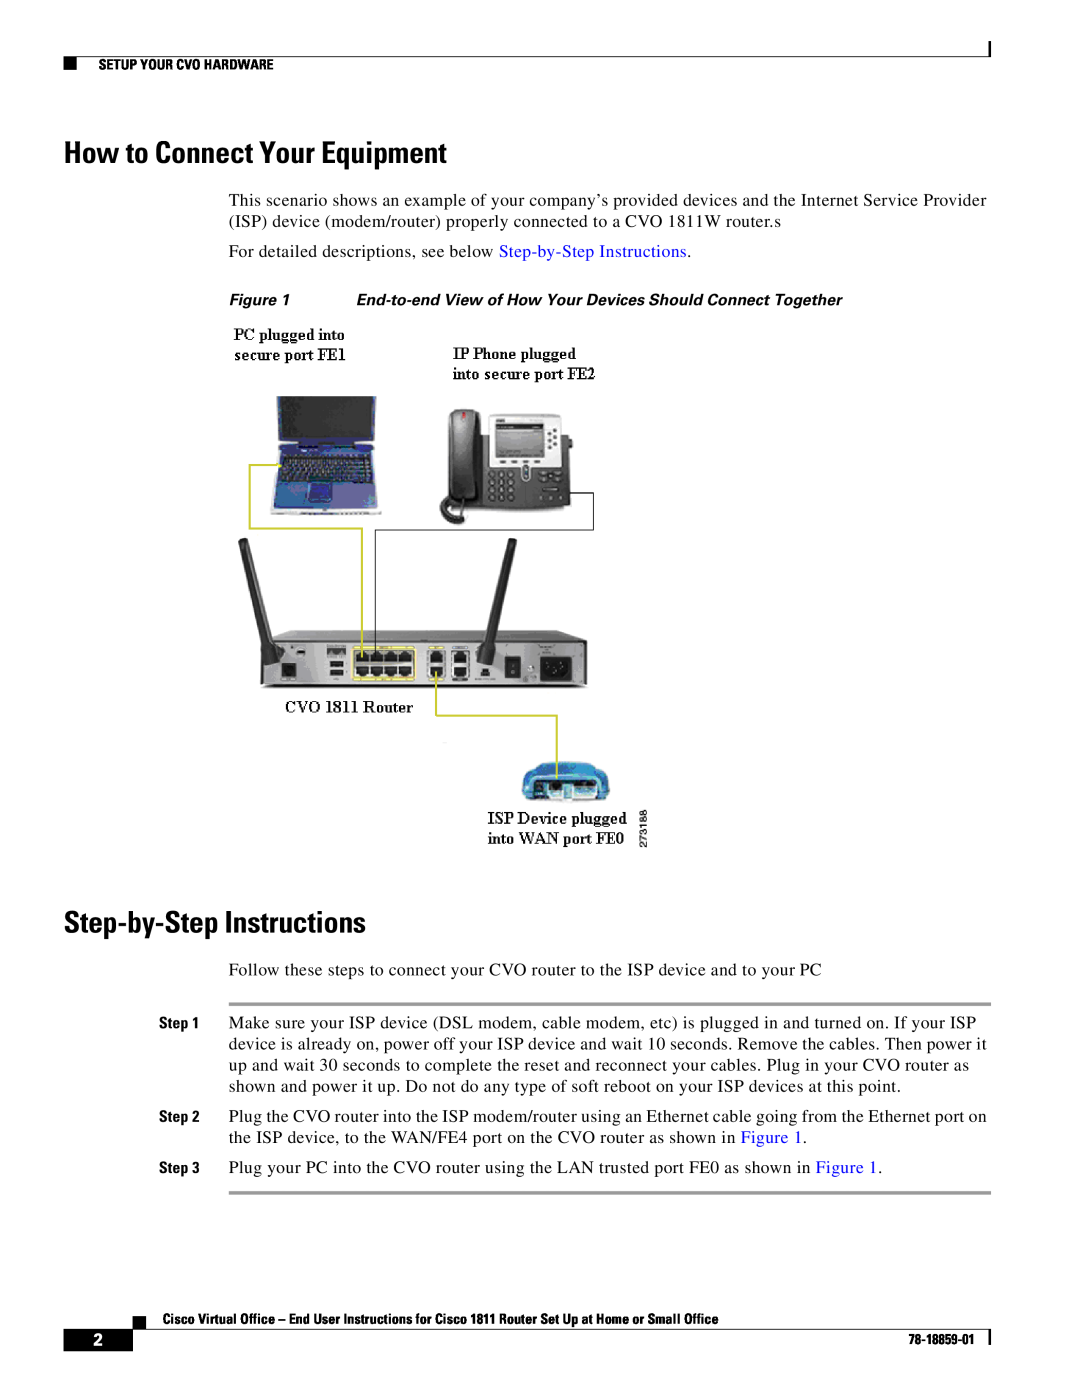 Cisco Systems CISCO1811 manual How to Connect Your Equipment, Step-by-Step Instructions 